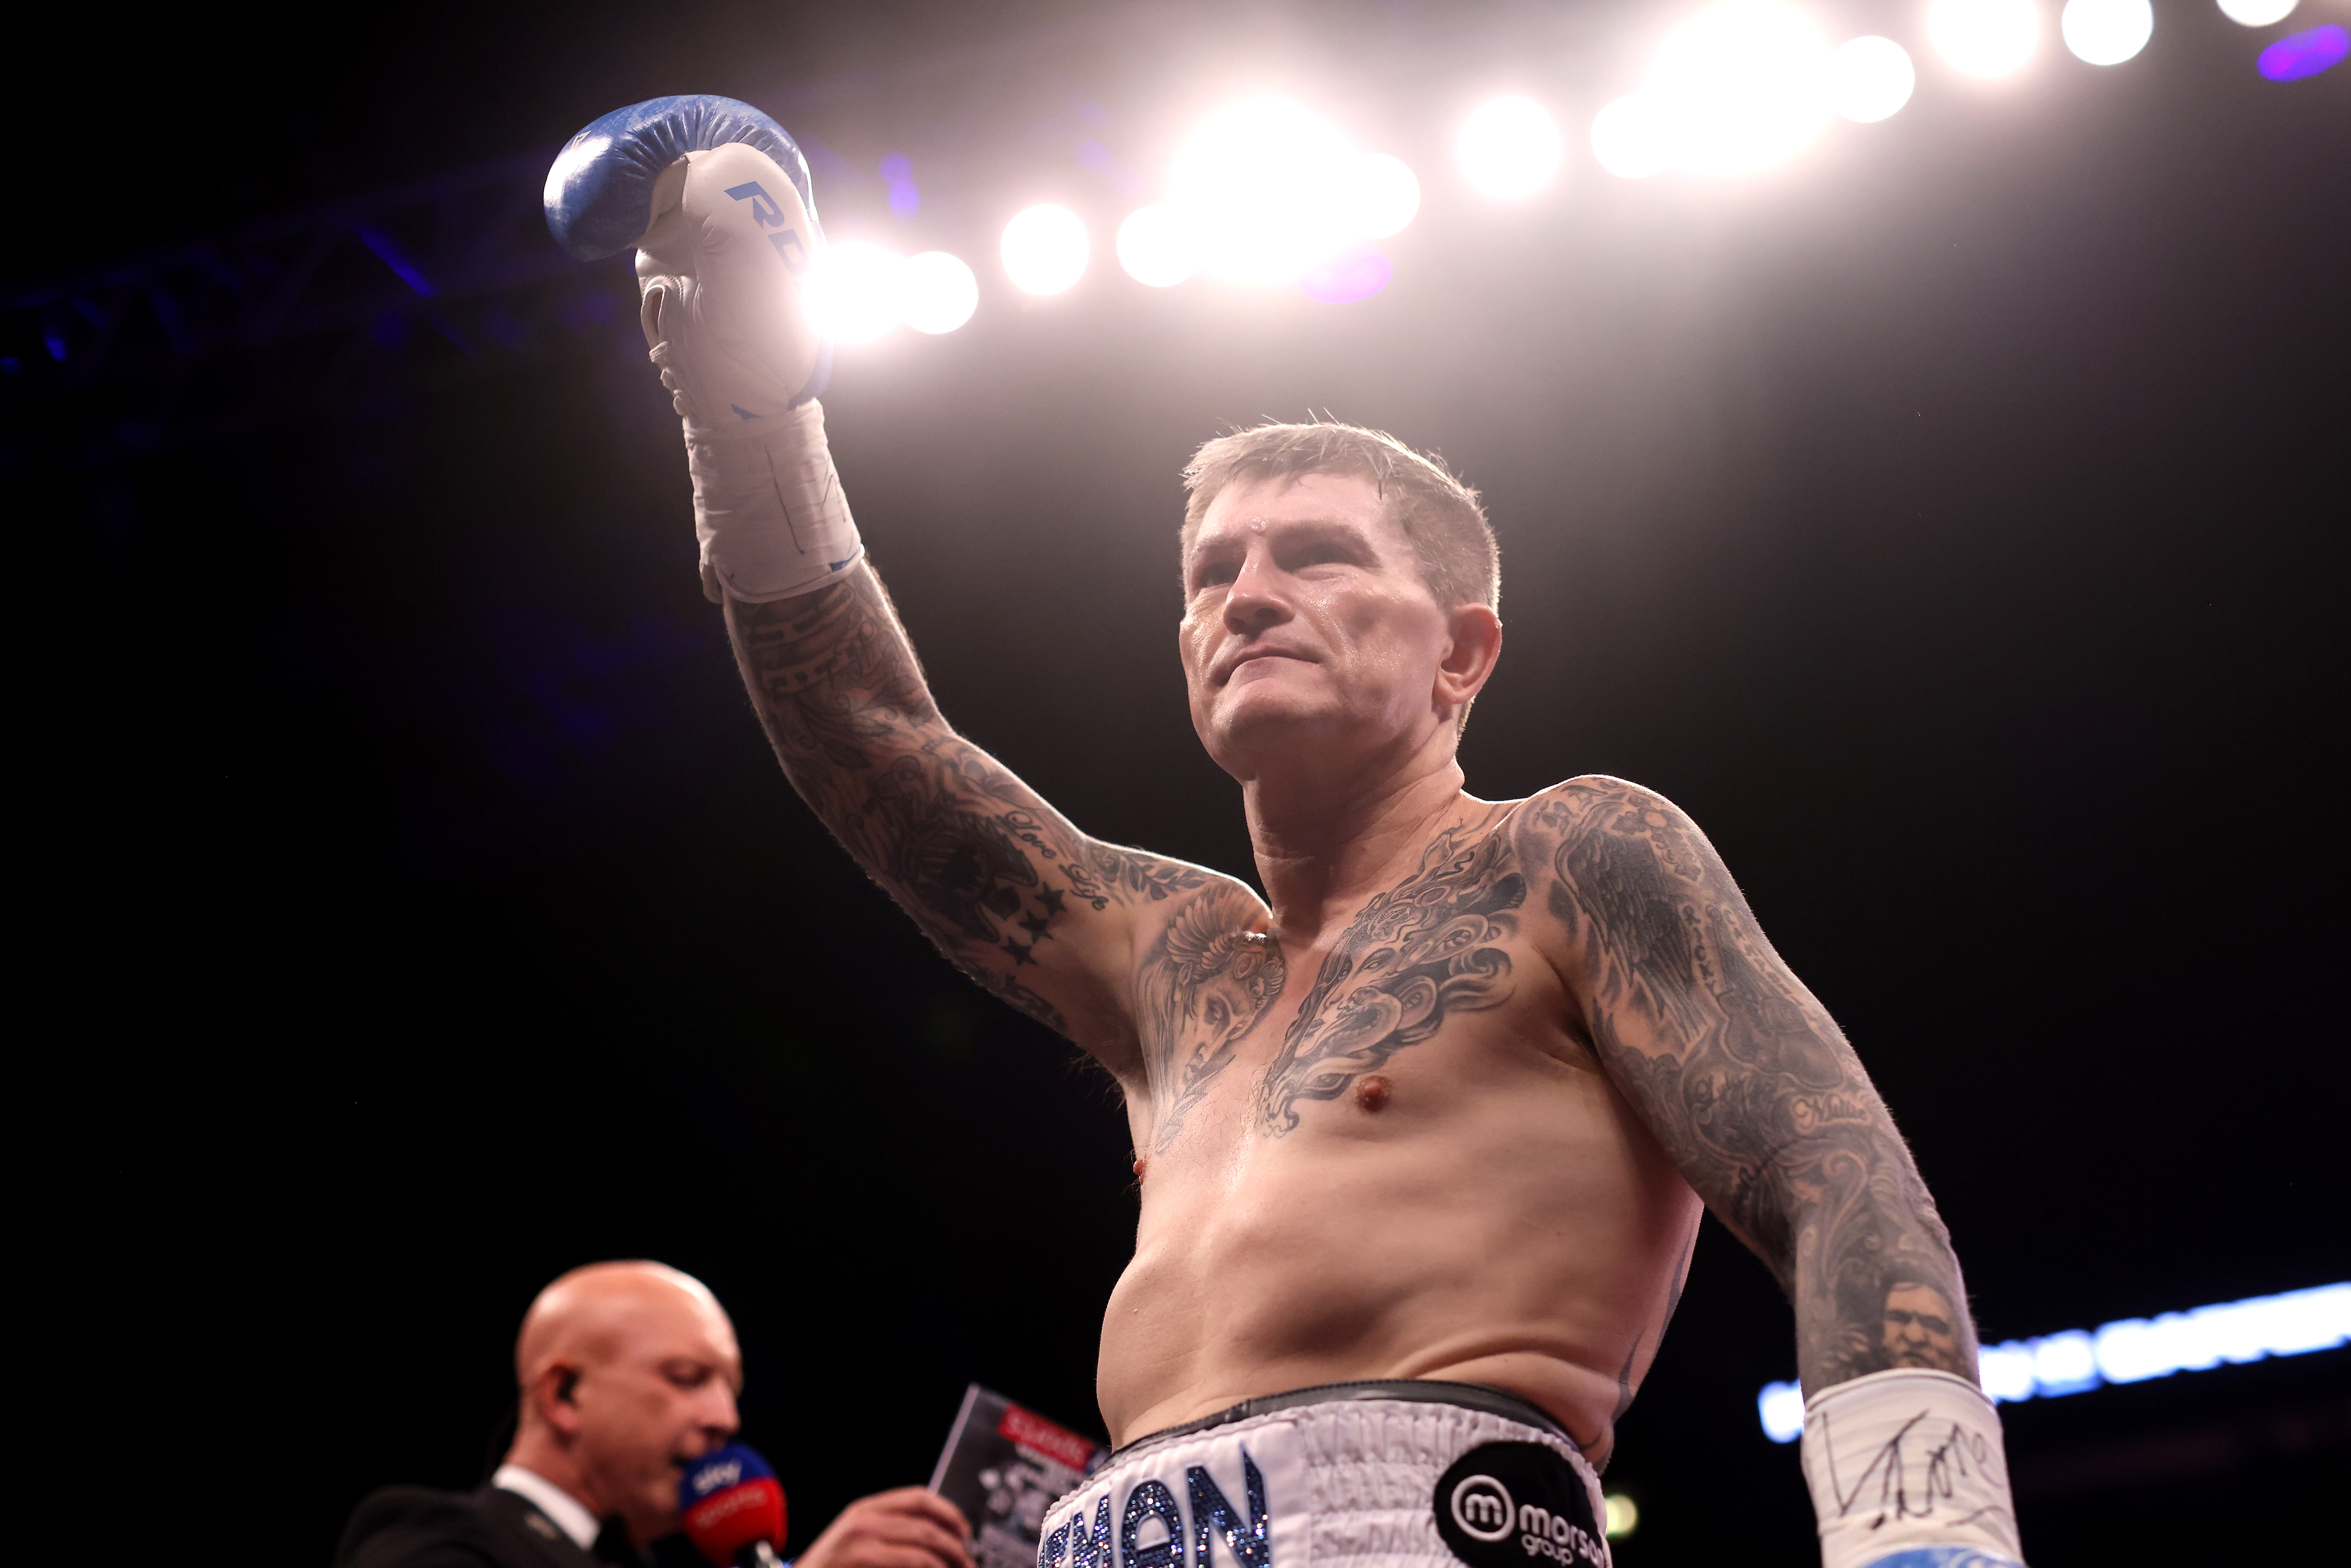 Ricky Hatton was able to say goodbye to the sport he loves on his own terms this weekend